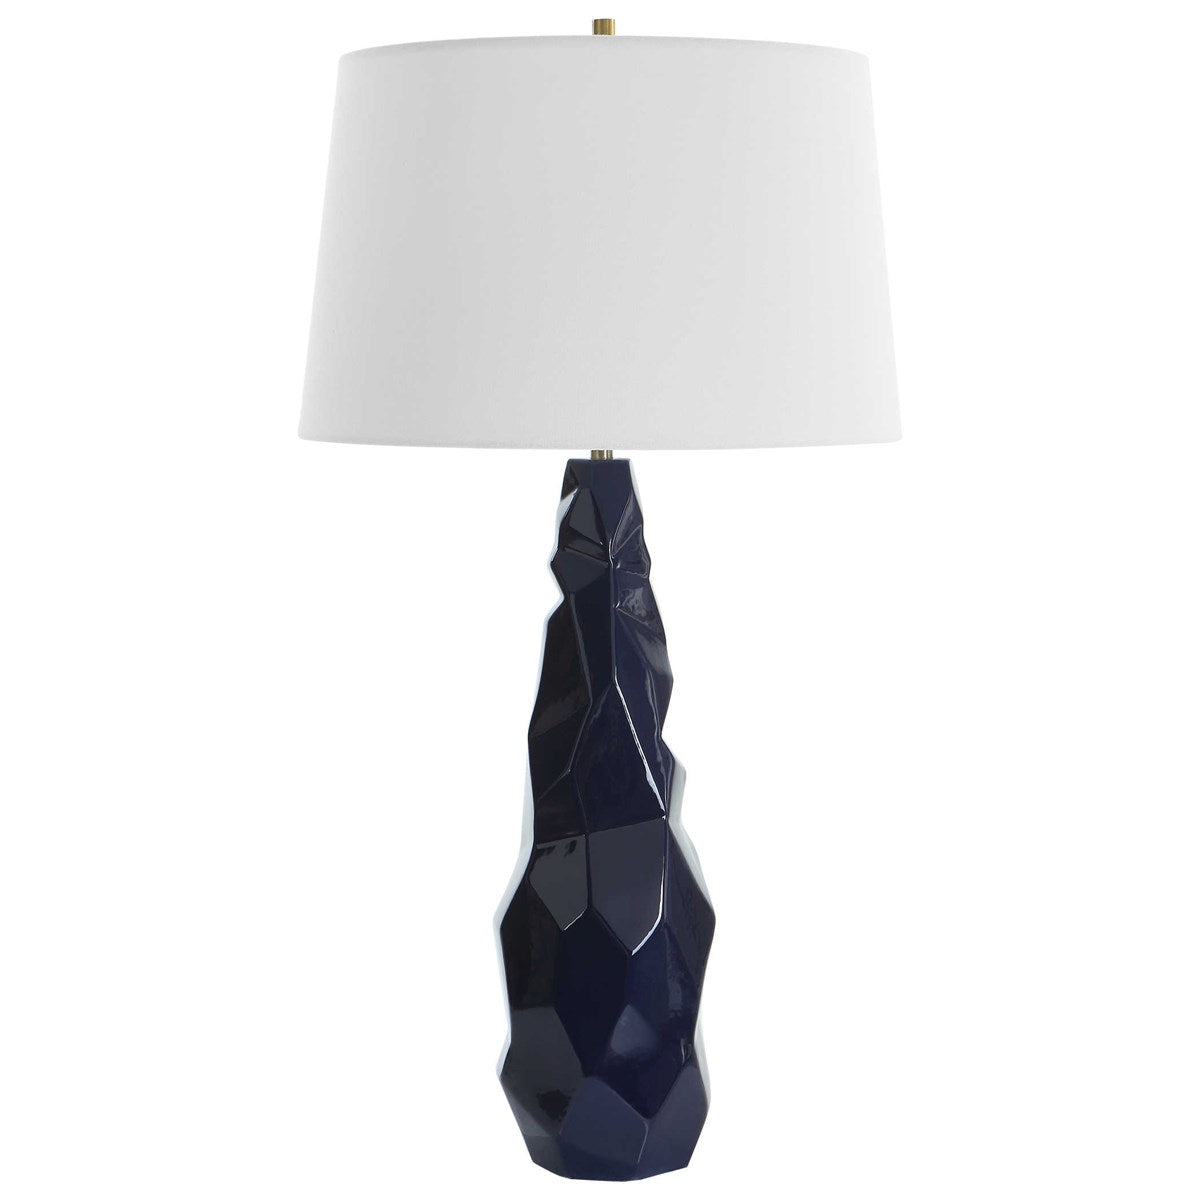 Kavos Table Lamp